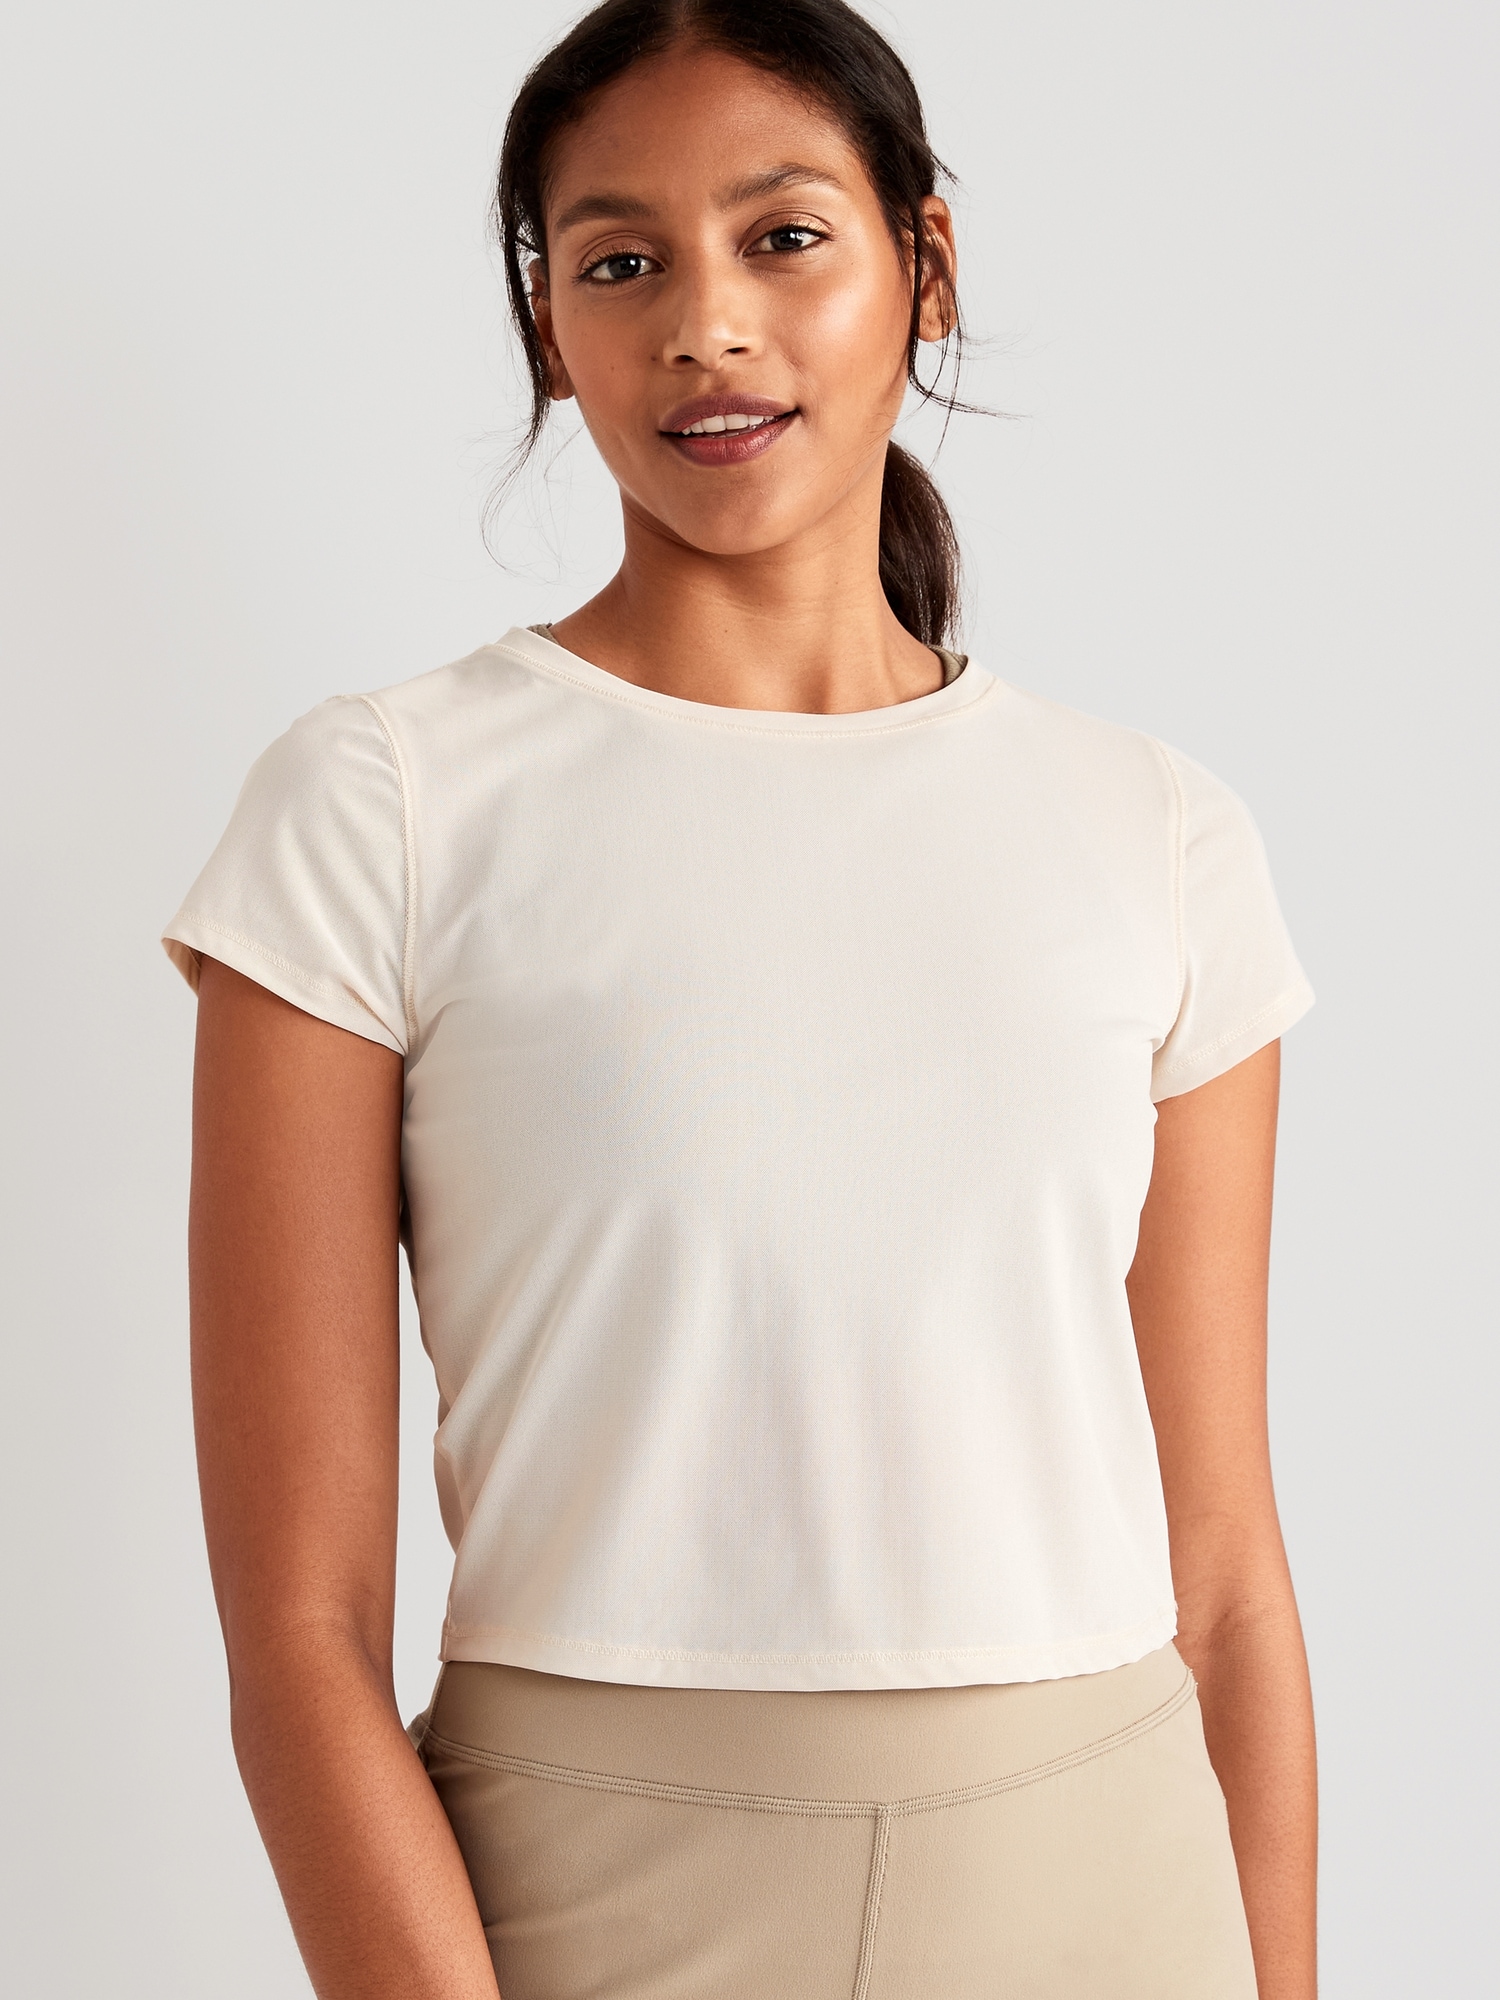 Old Navy PowerSoft Cropped T-Shirt for Women beige. 1